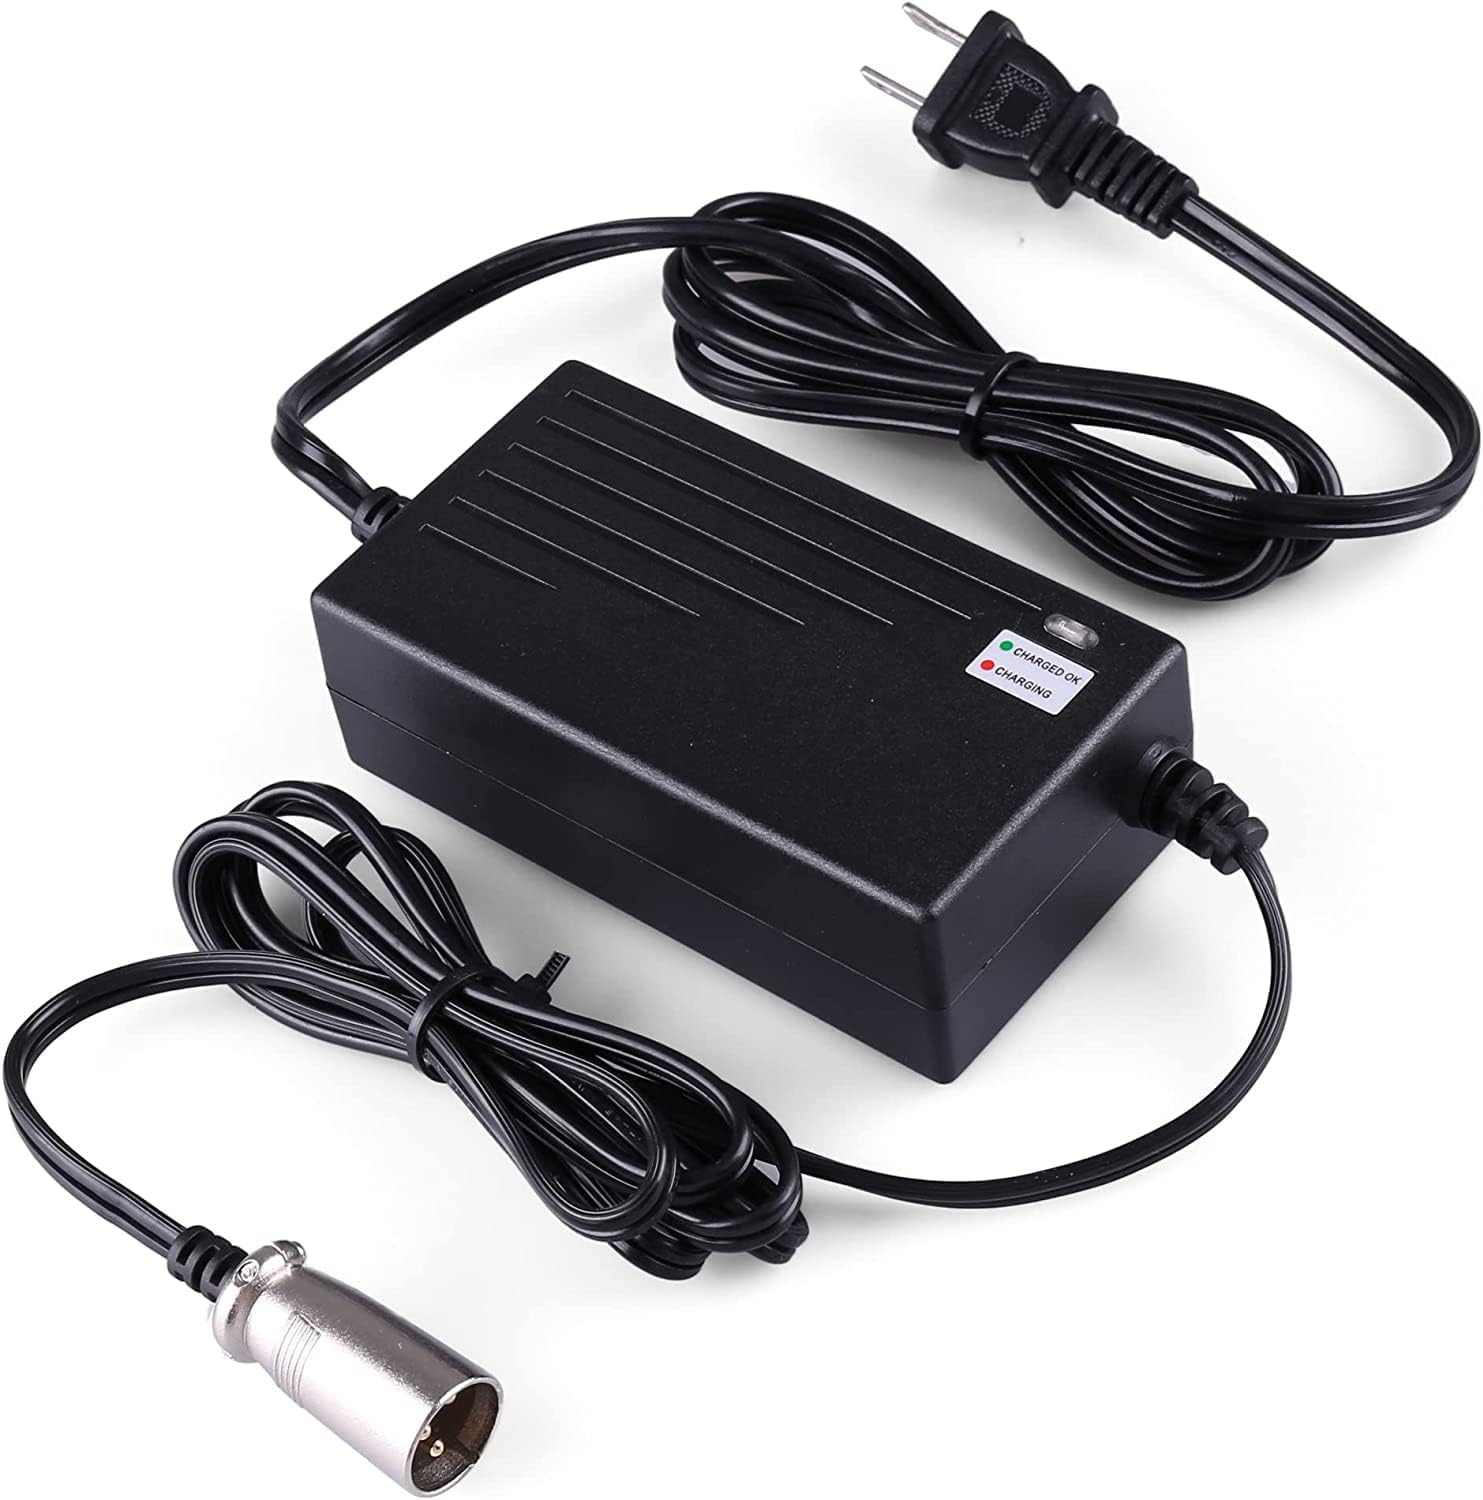 36V 1.5A Battery Charger for Razor MX500 - Premium 36V 1500mA Scooter Quick Charger (3-Pin XLR Connector) for Razor Craz